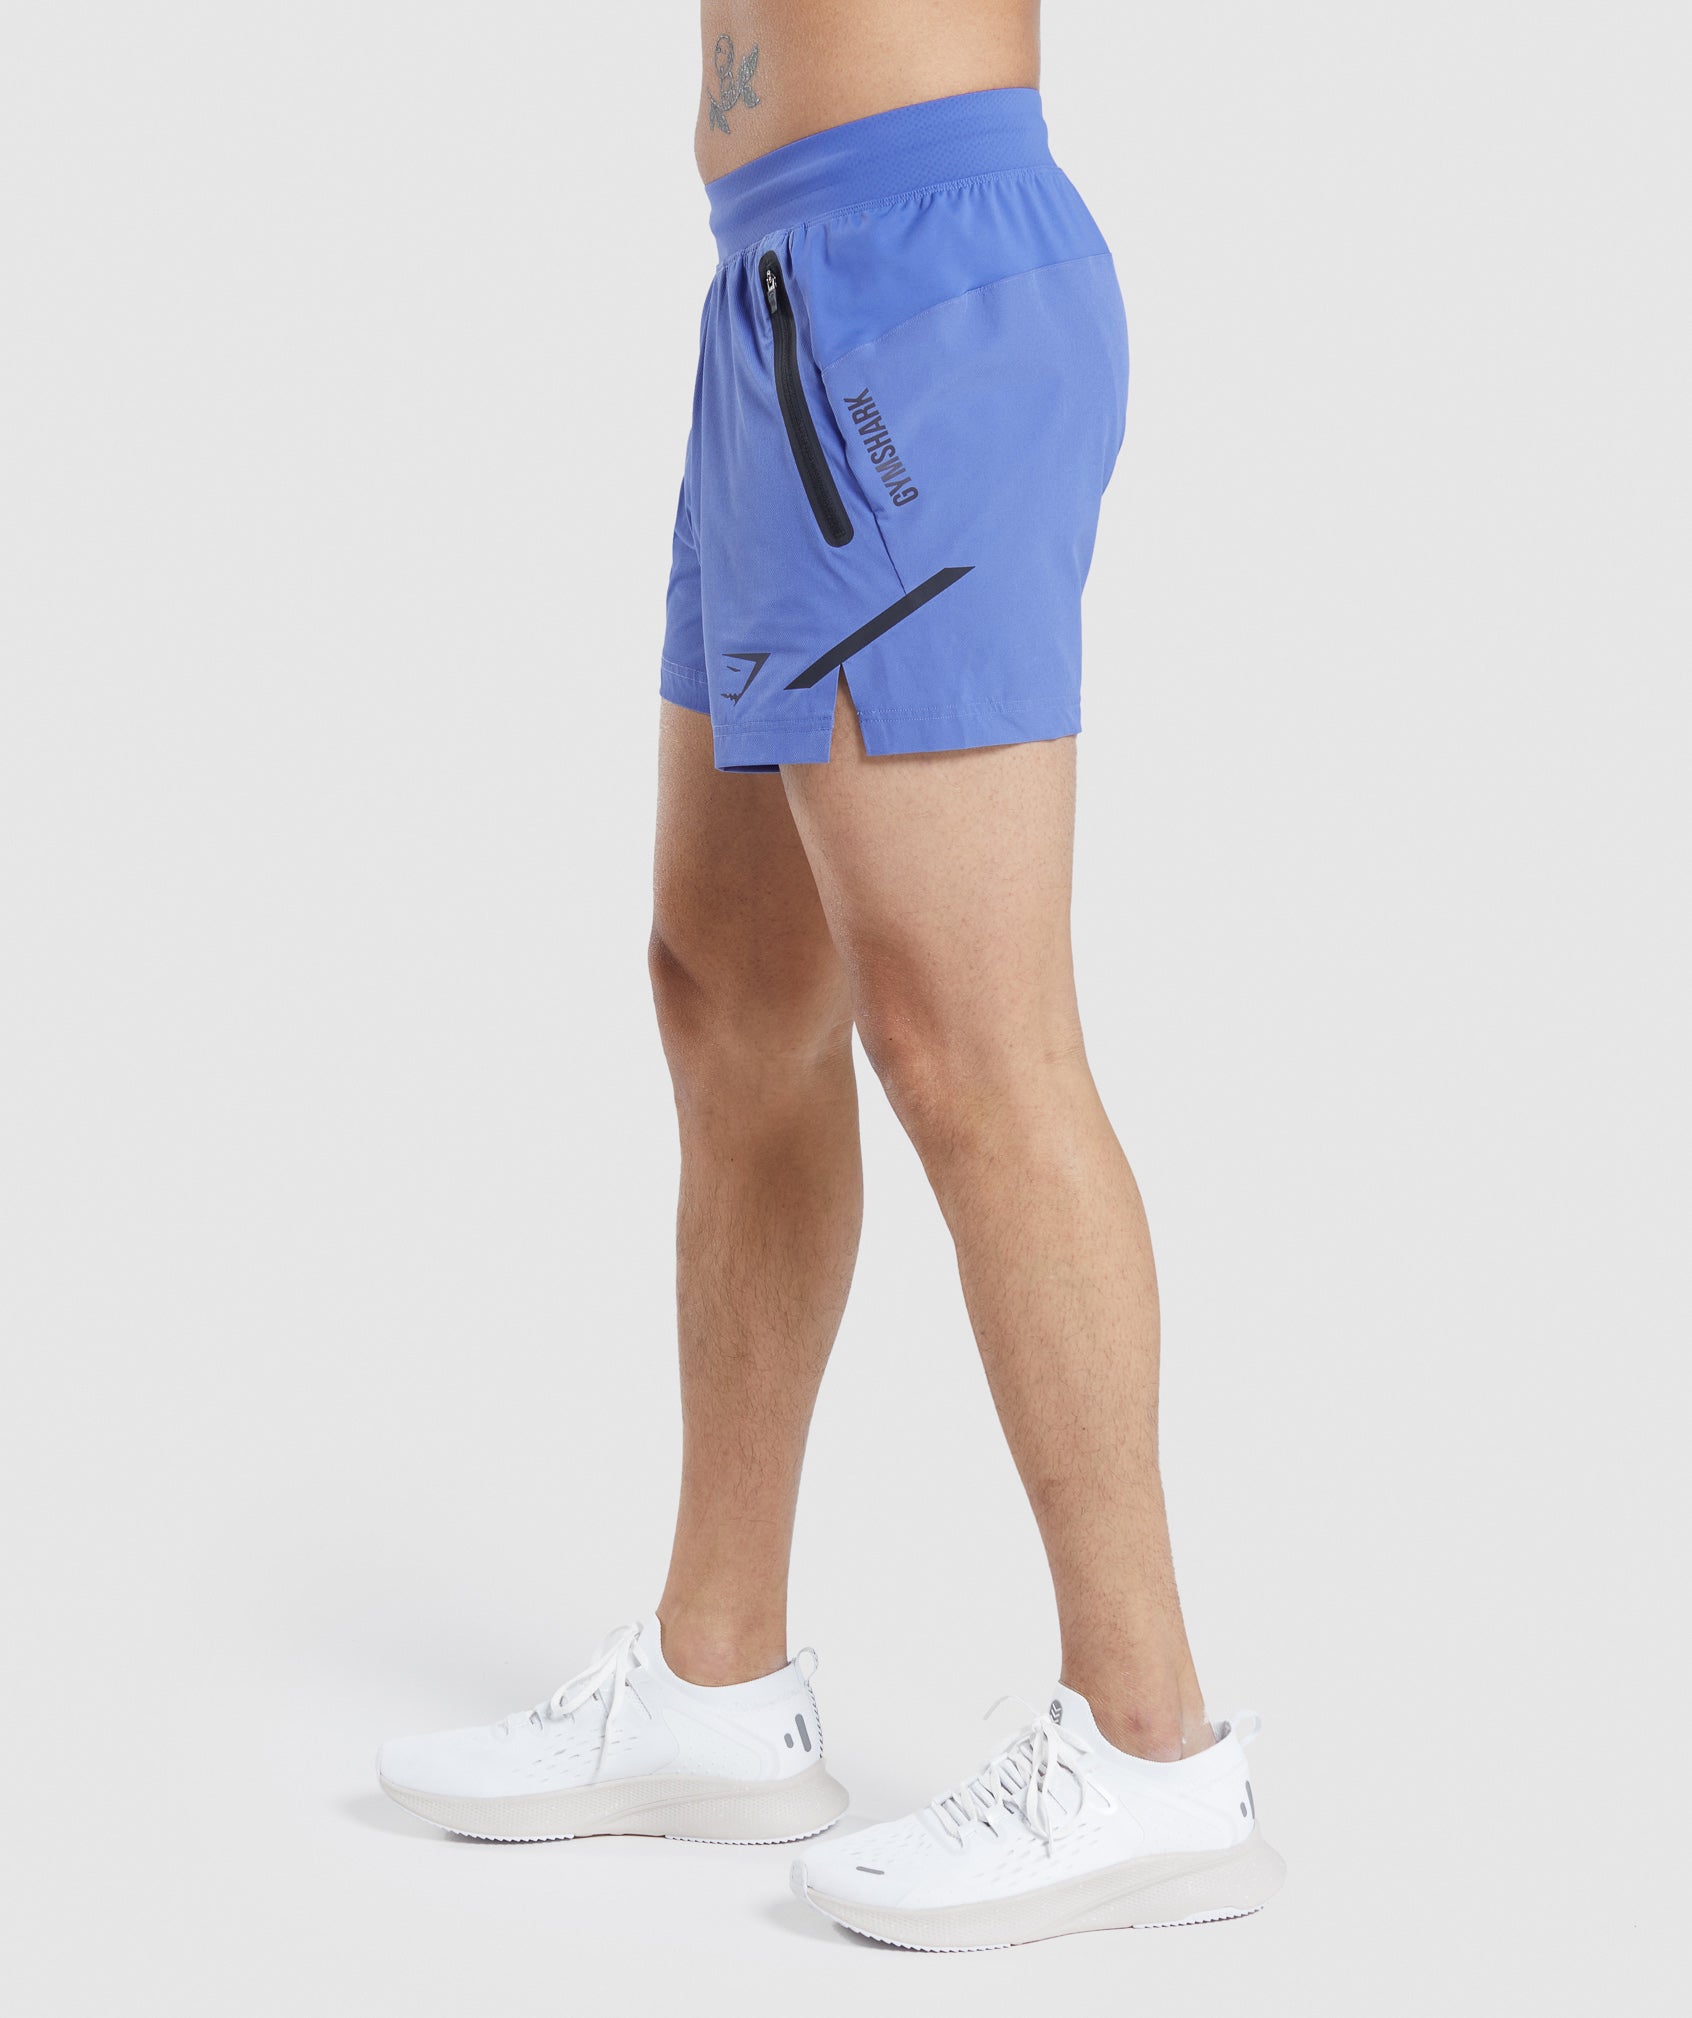 Apex 5" Perform Shorts in Court Blue - view 2